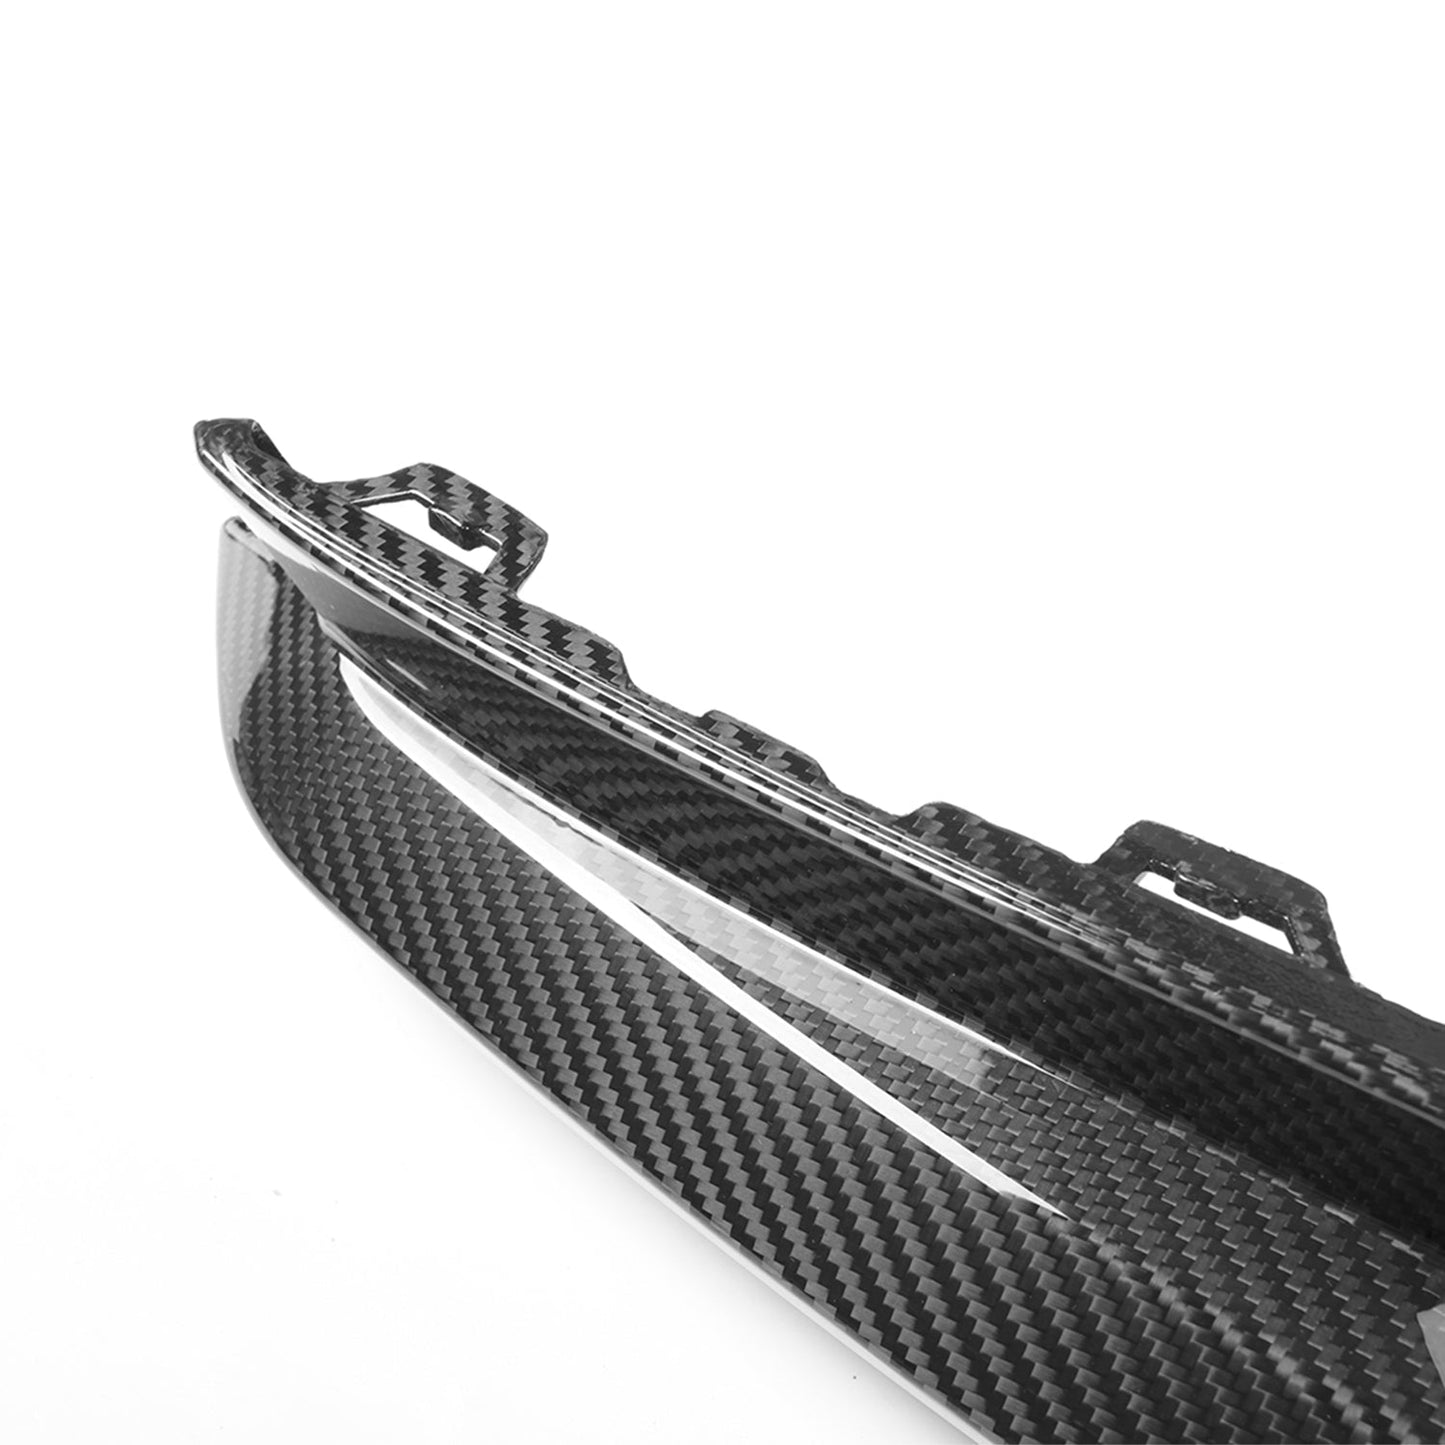 MHC+ BMW M3 OEM Style Replacement Rear Side Diffusers In Pre Preg Carbon Fibre (G80/G81)